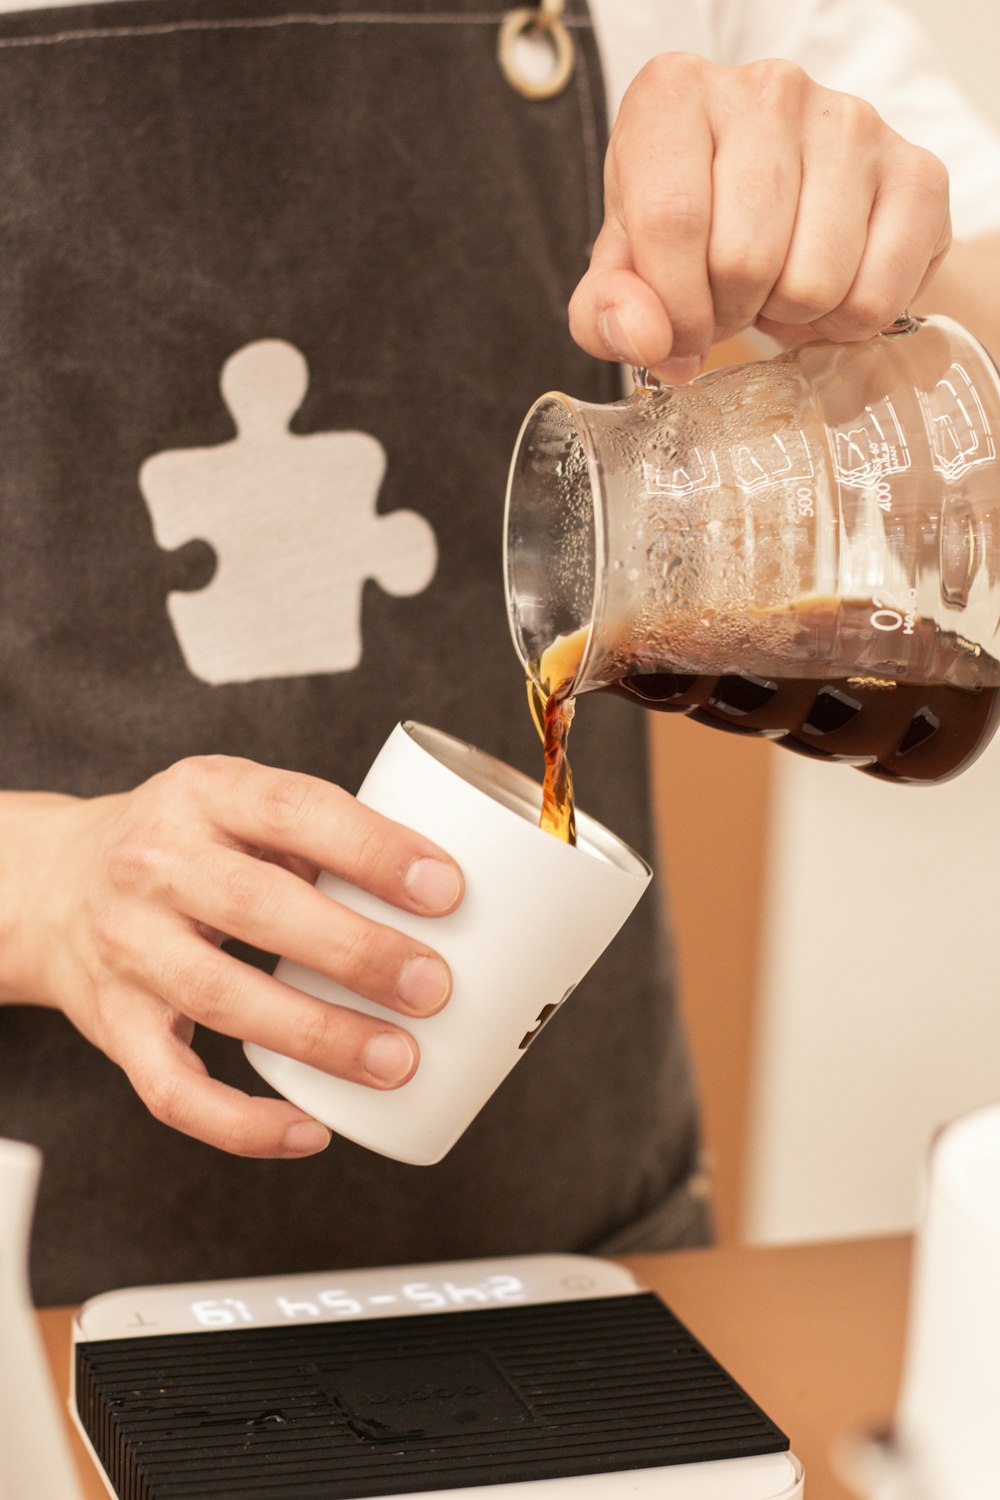 a person pouring coffee into a cup